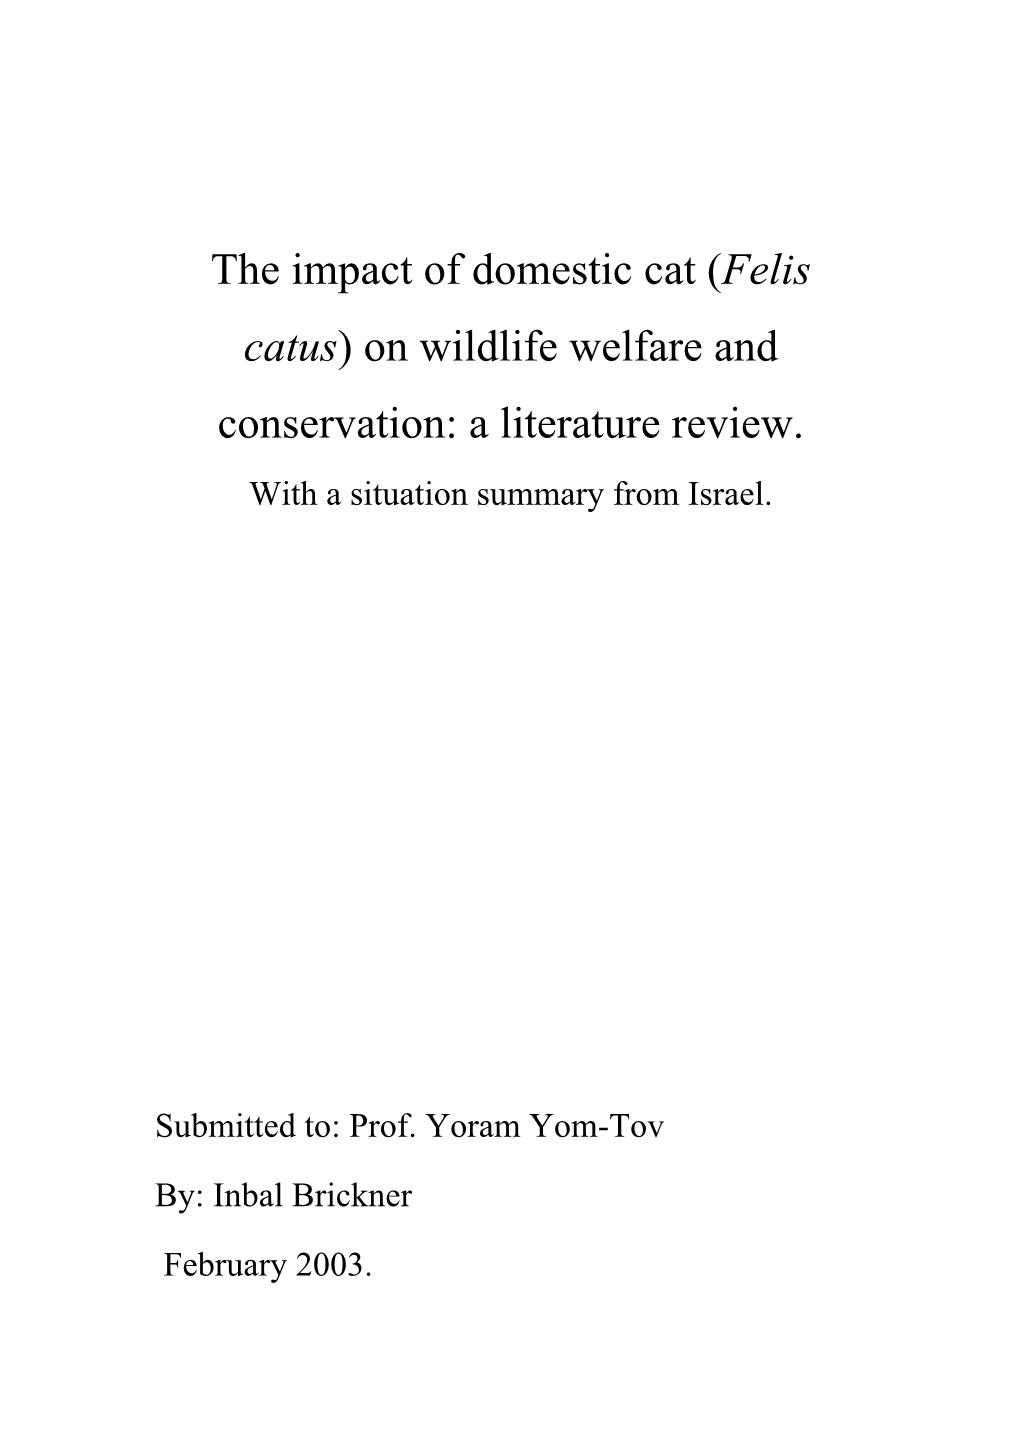 The Impact of Domestic Cat (Felis Catus) on Wildlife Welfare and Conservation: a Literature Review